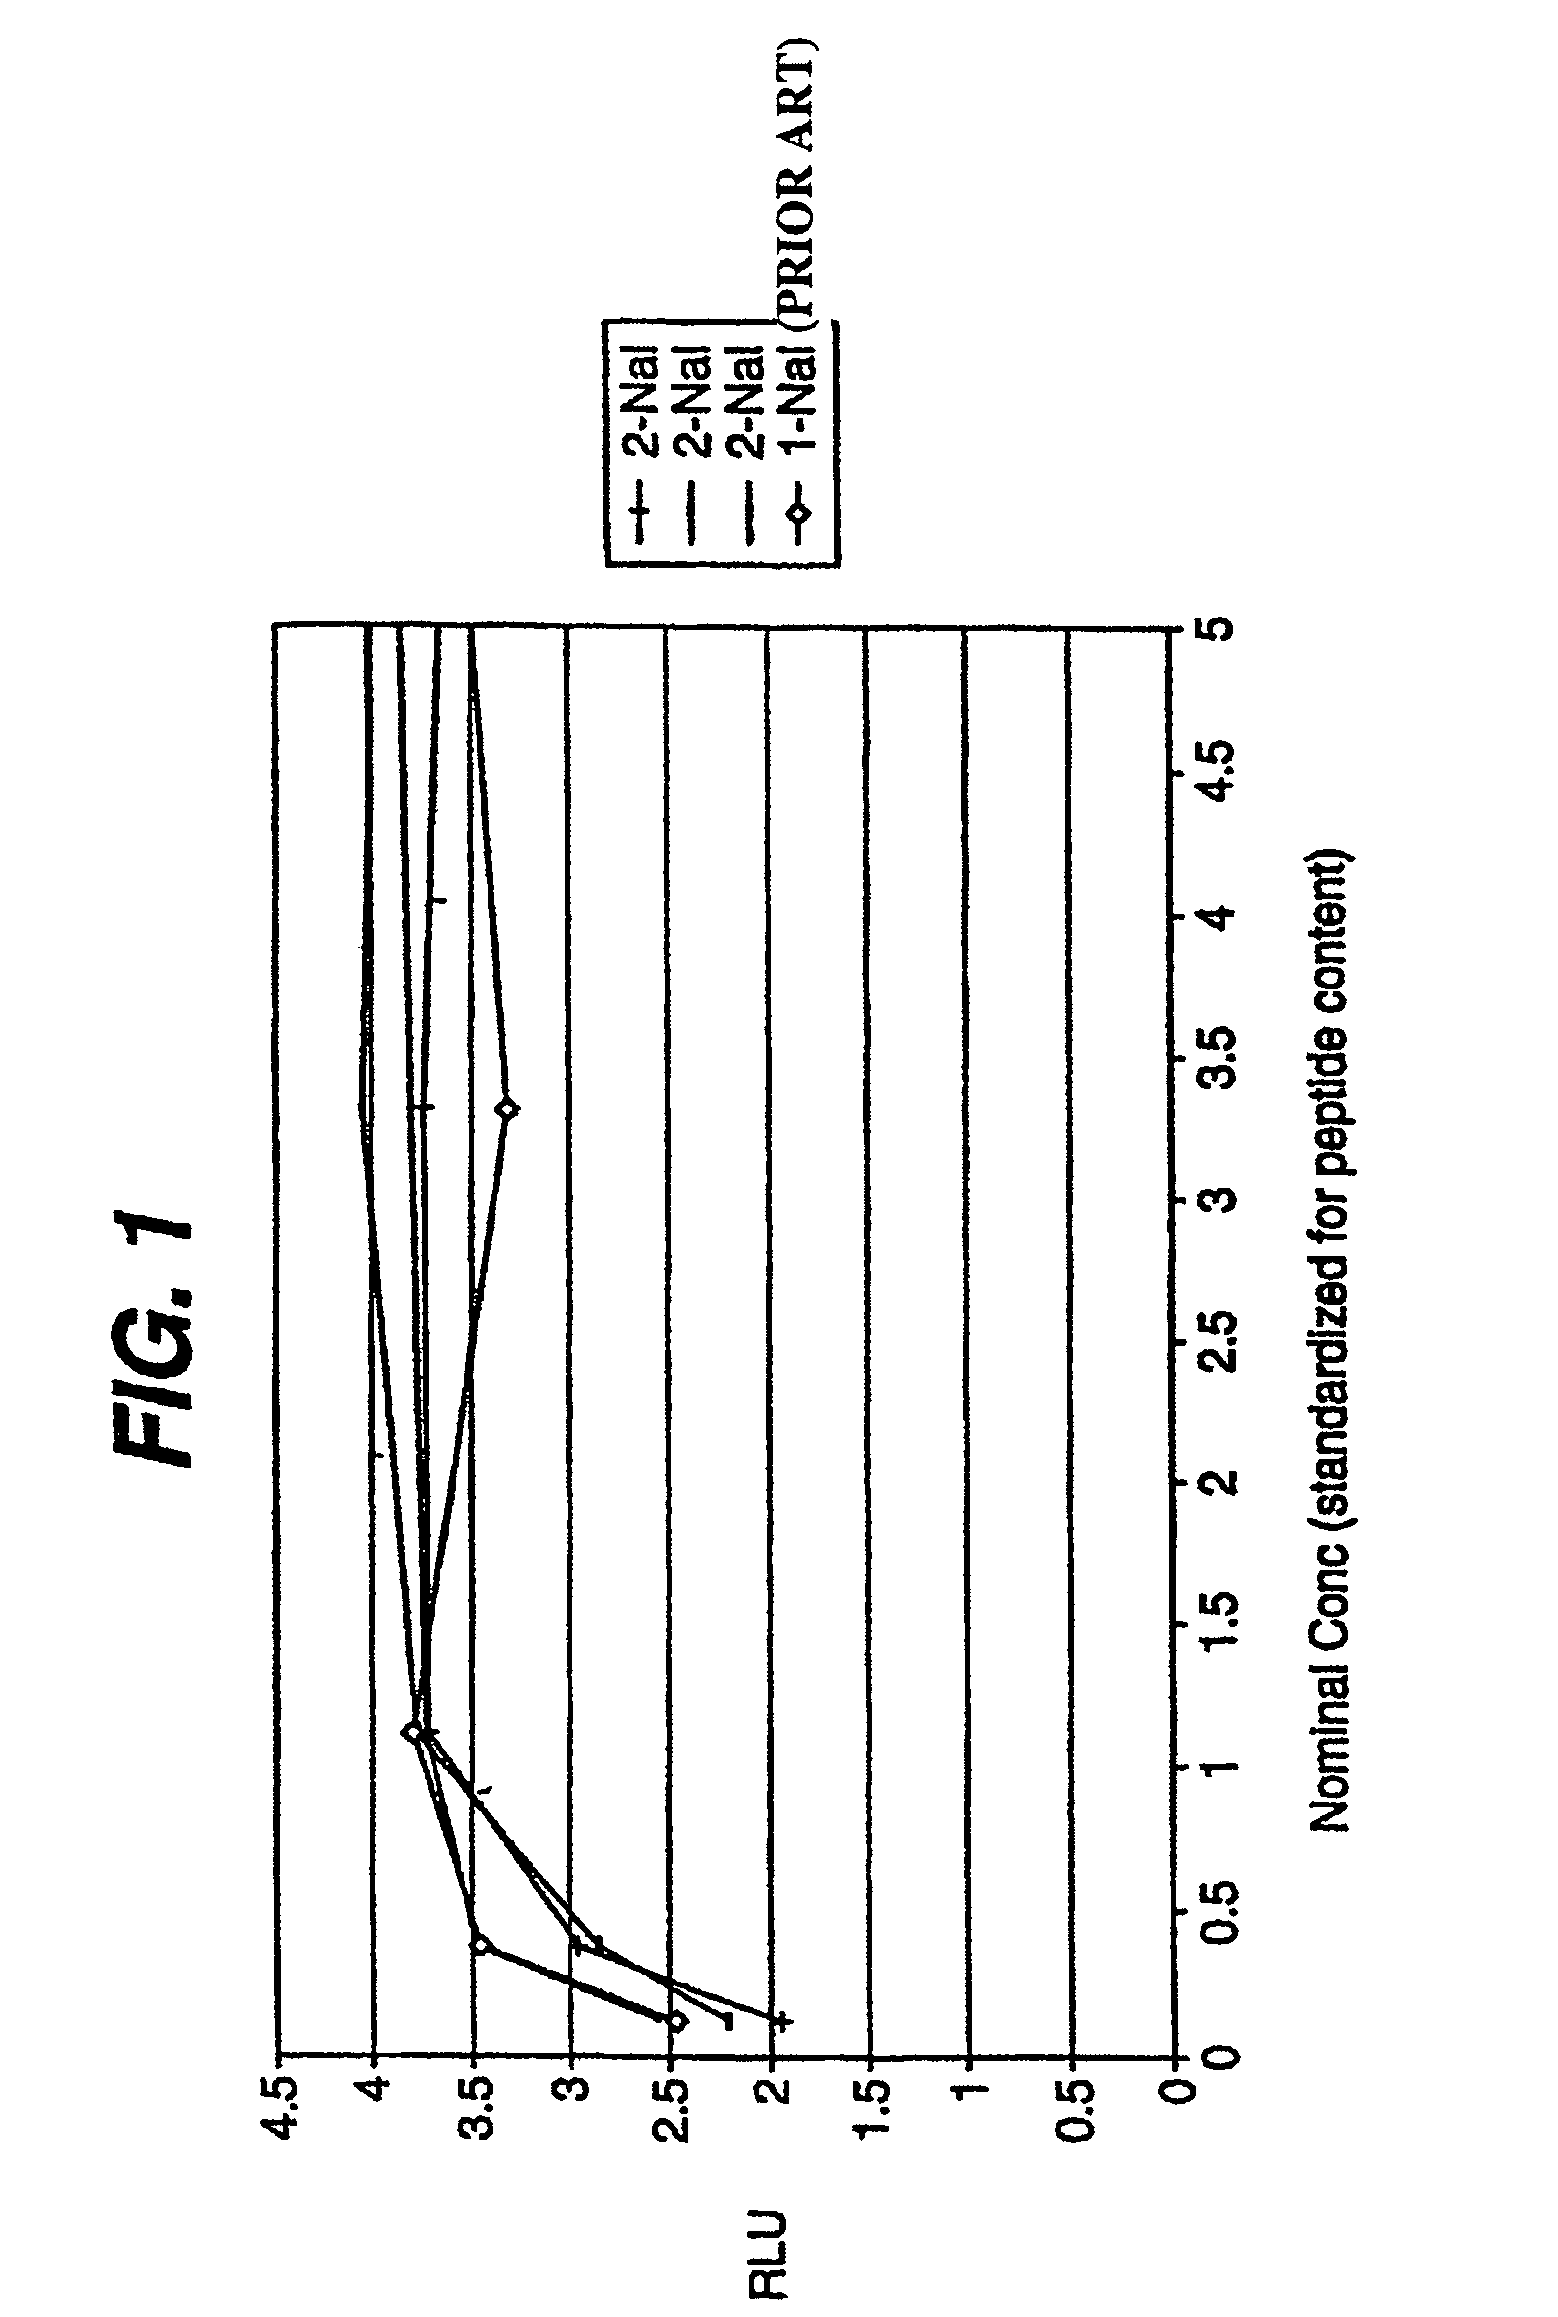 Peptides and compounds that bind to a receptor